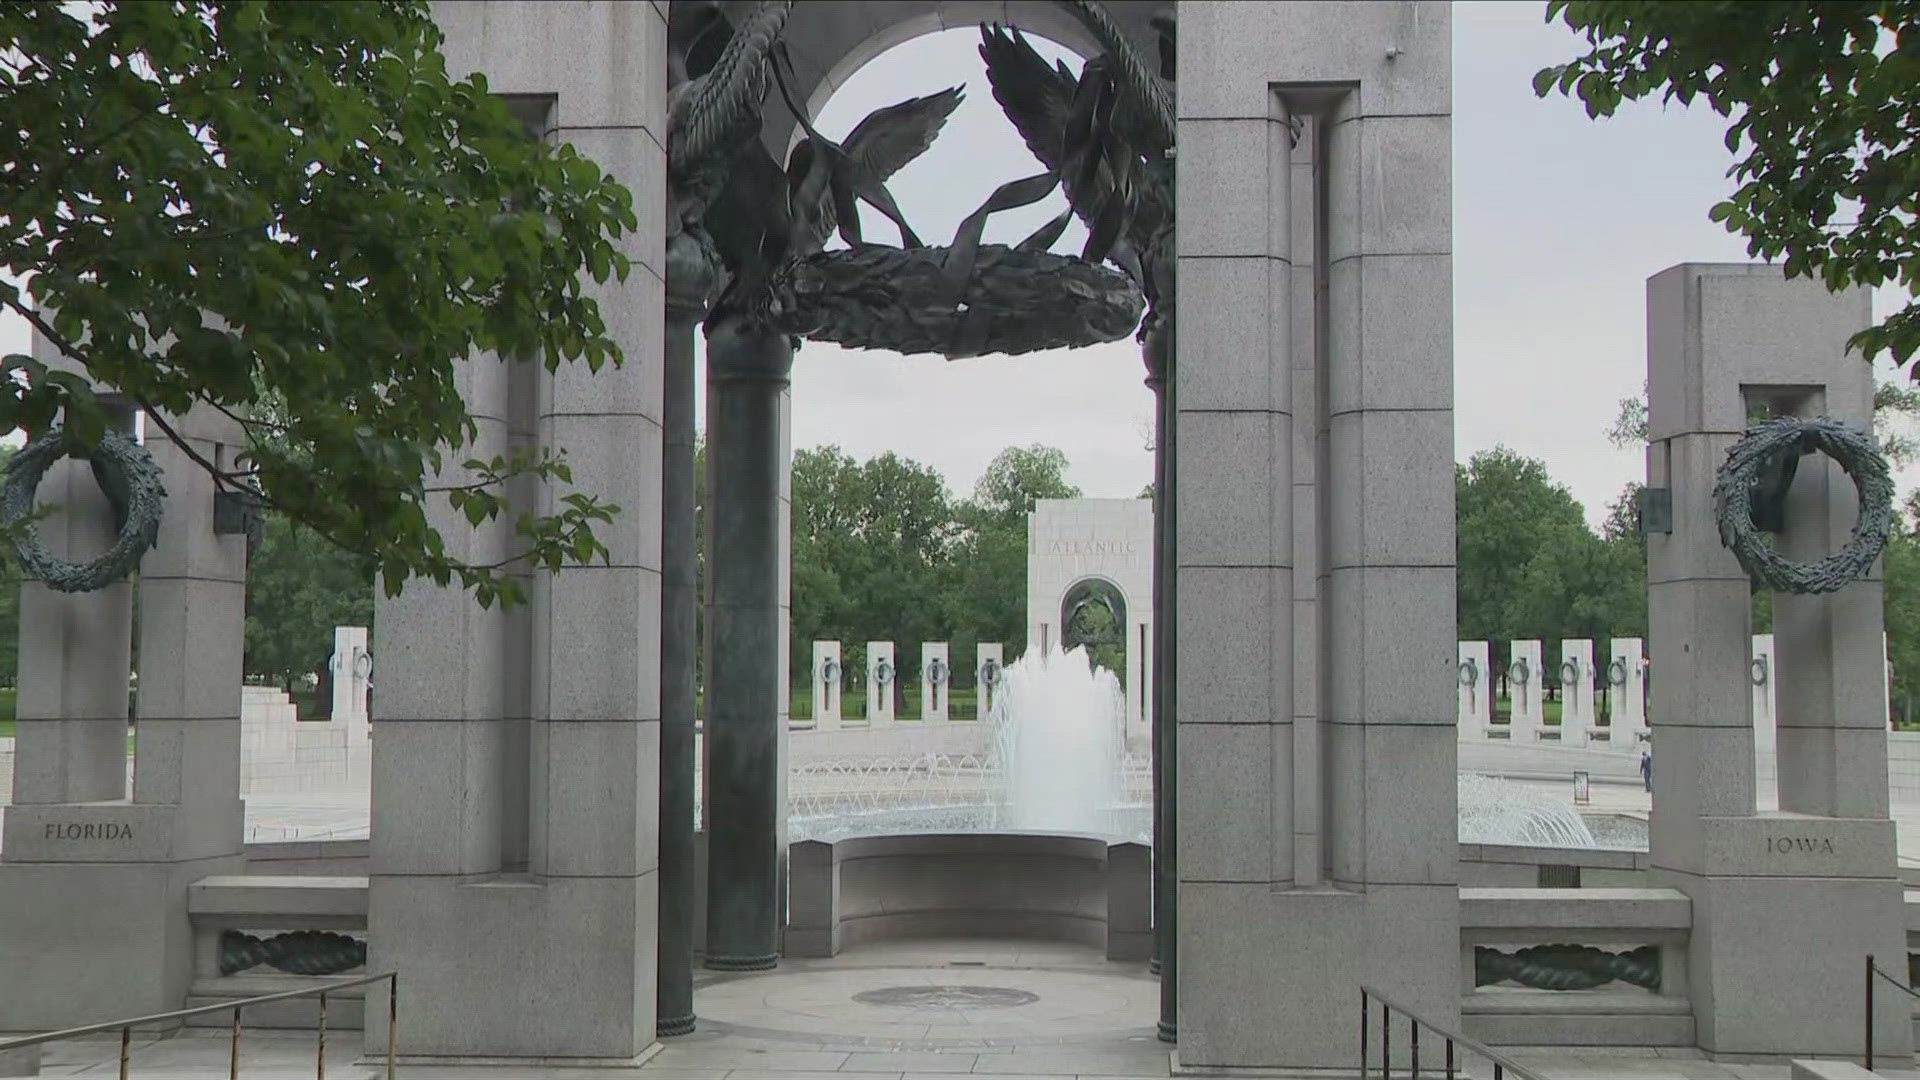 Memorial Day observances planned on the National Mall